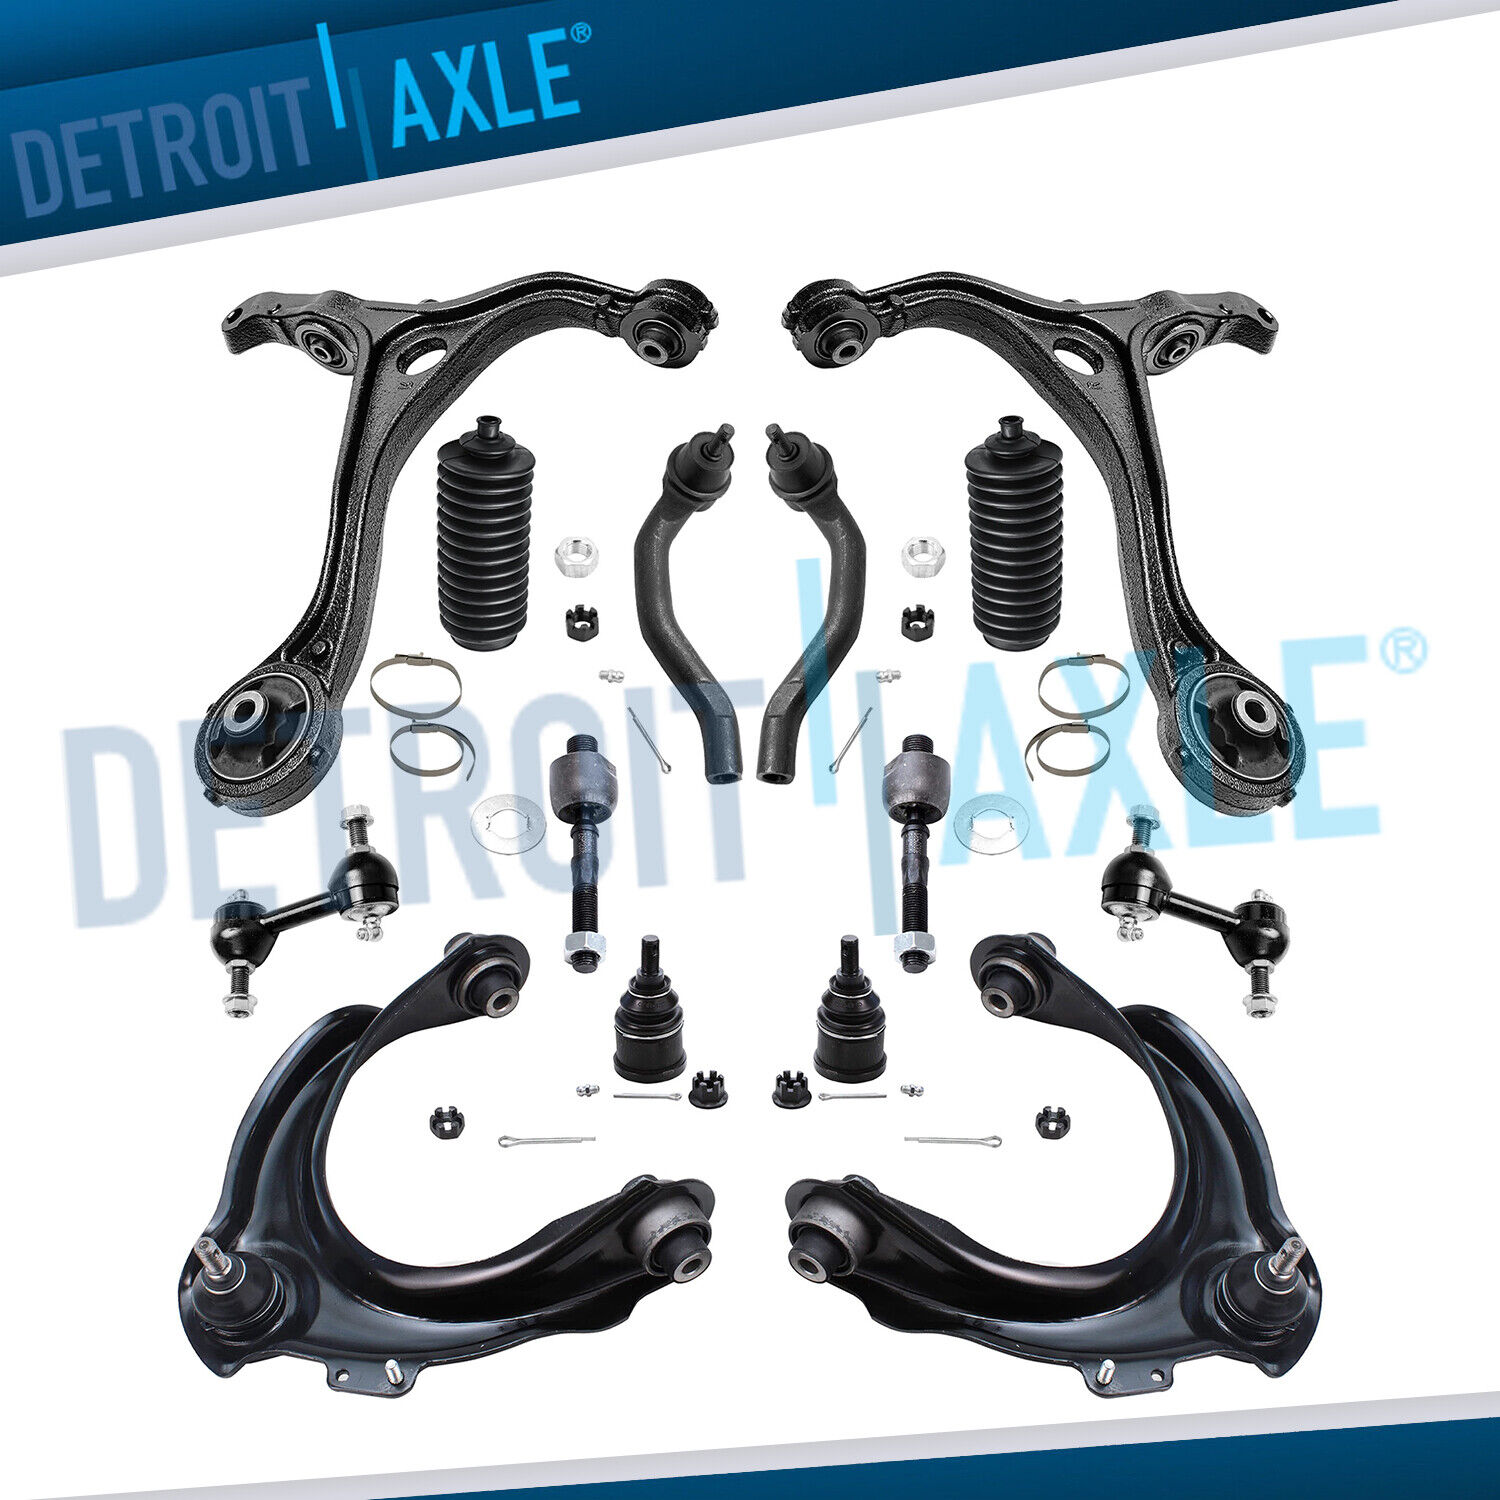 14pc Front Upper Lower Control Arms Suspension Kit for 2003 - 2007 Accord TSX